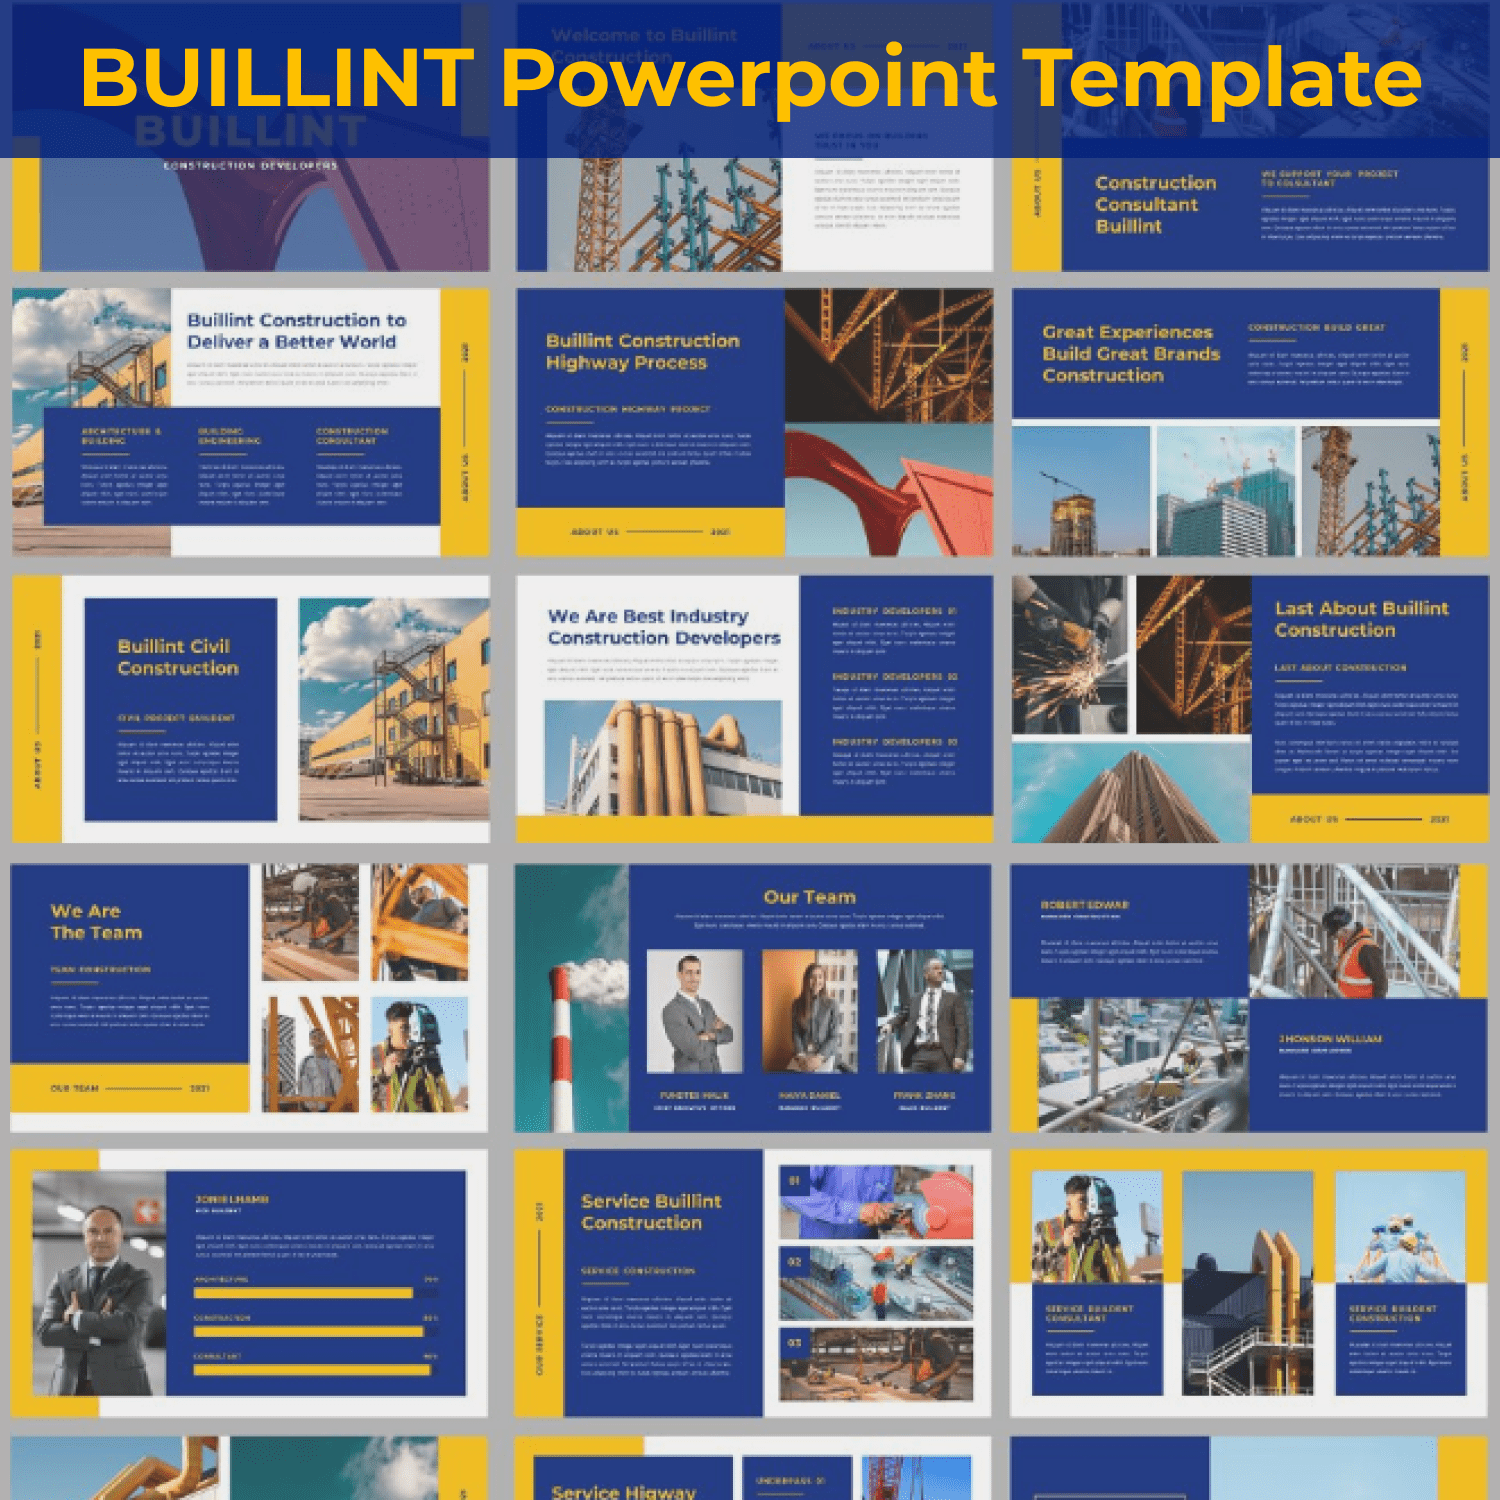 BUILLINT Powerpoint Template cover image.